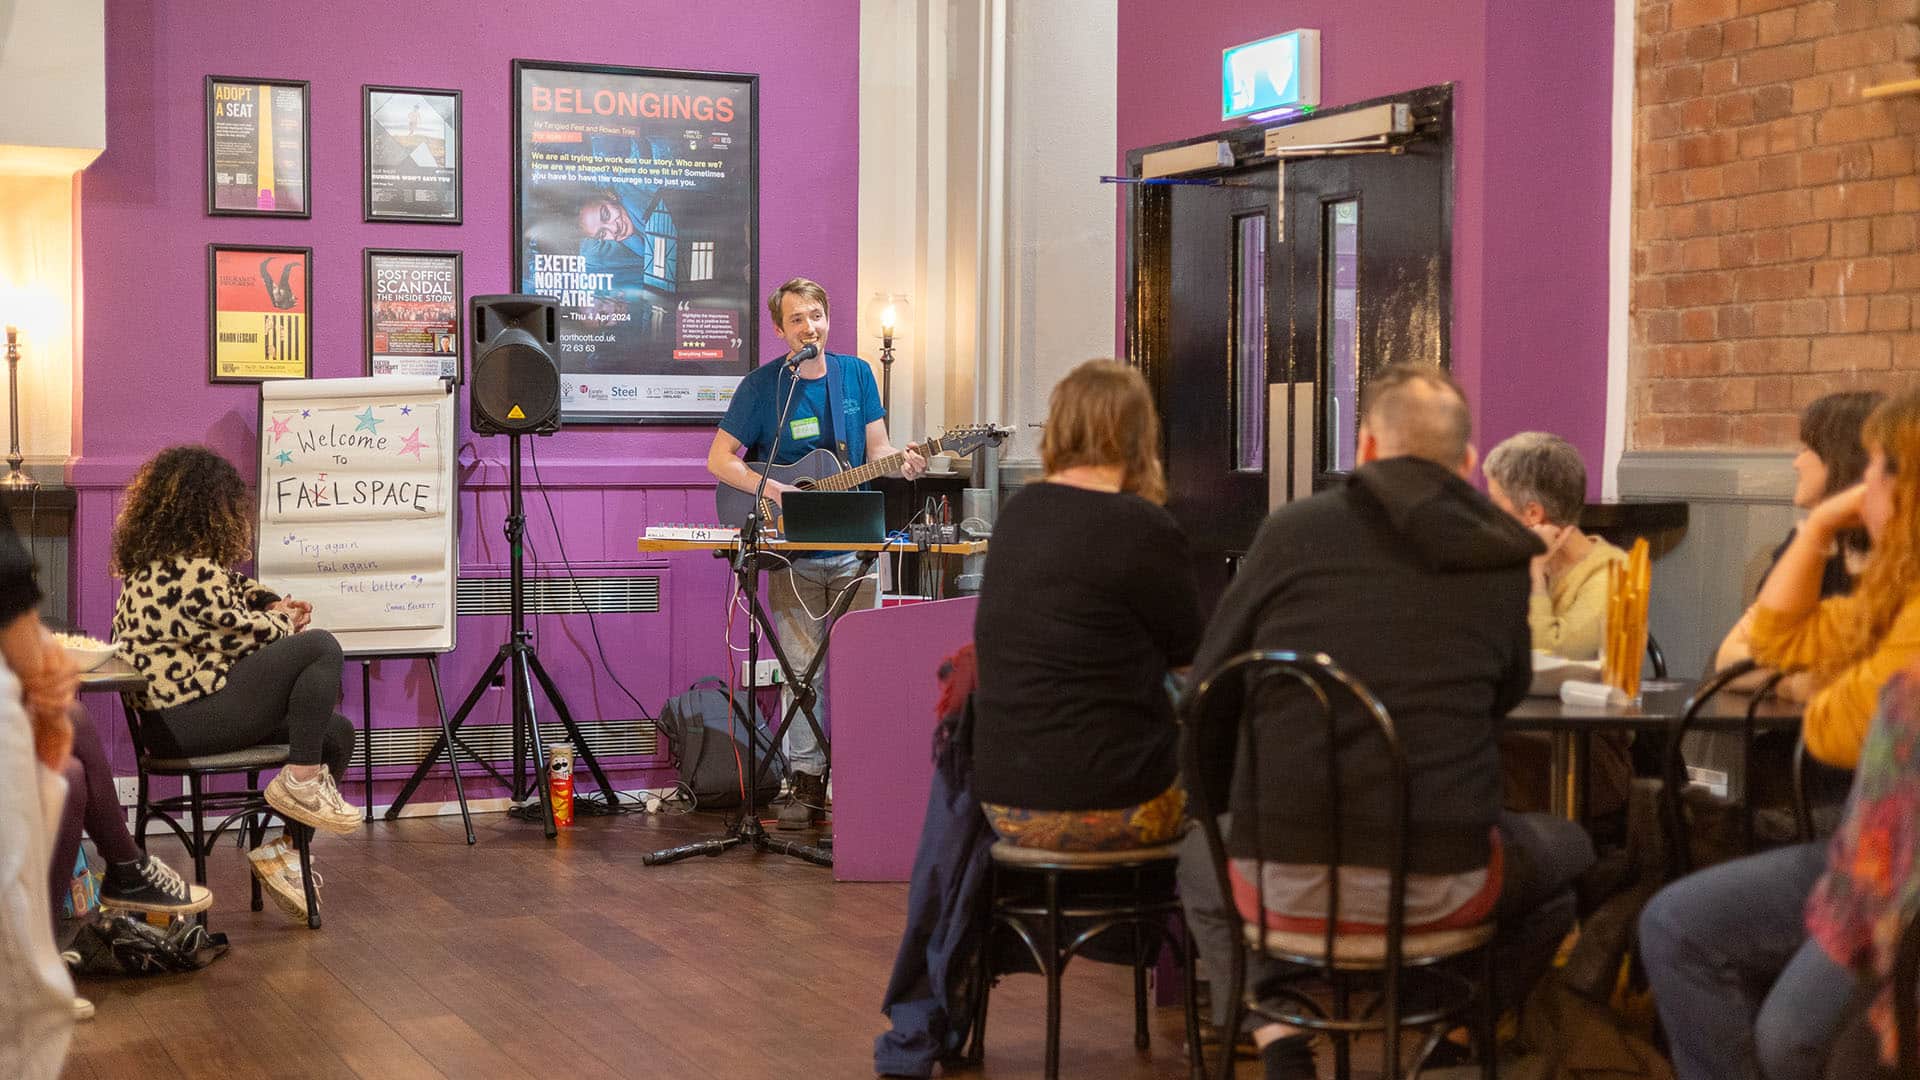 A musician with an acoustic guitar is playing music for a group of Failspace participants sat at tables in the Exeter Barnfield Theatre's bar.